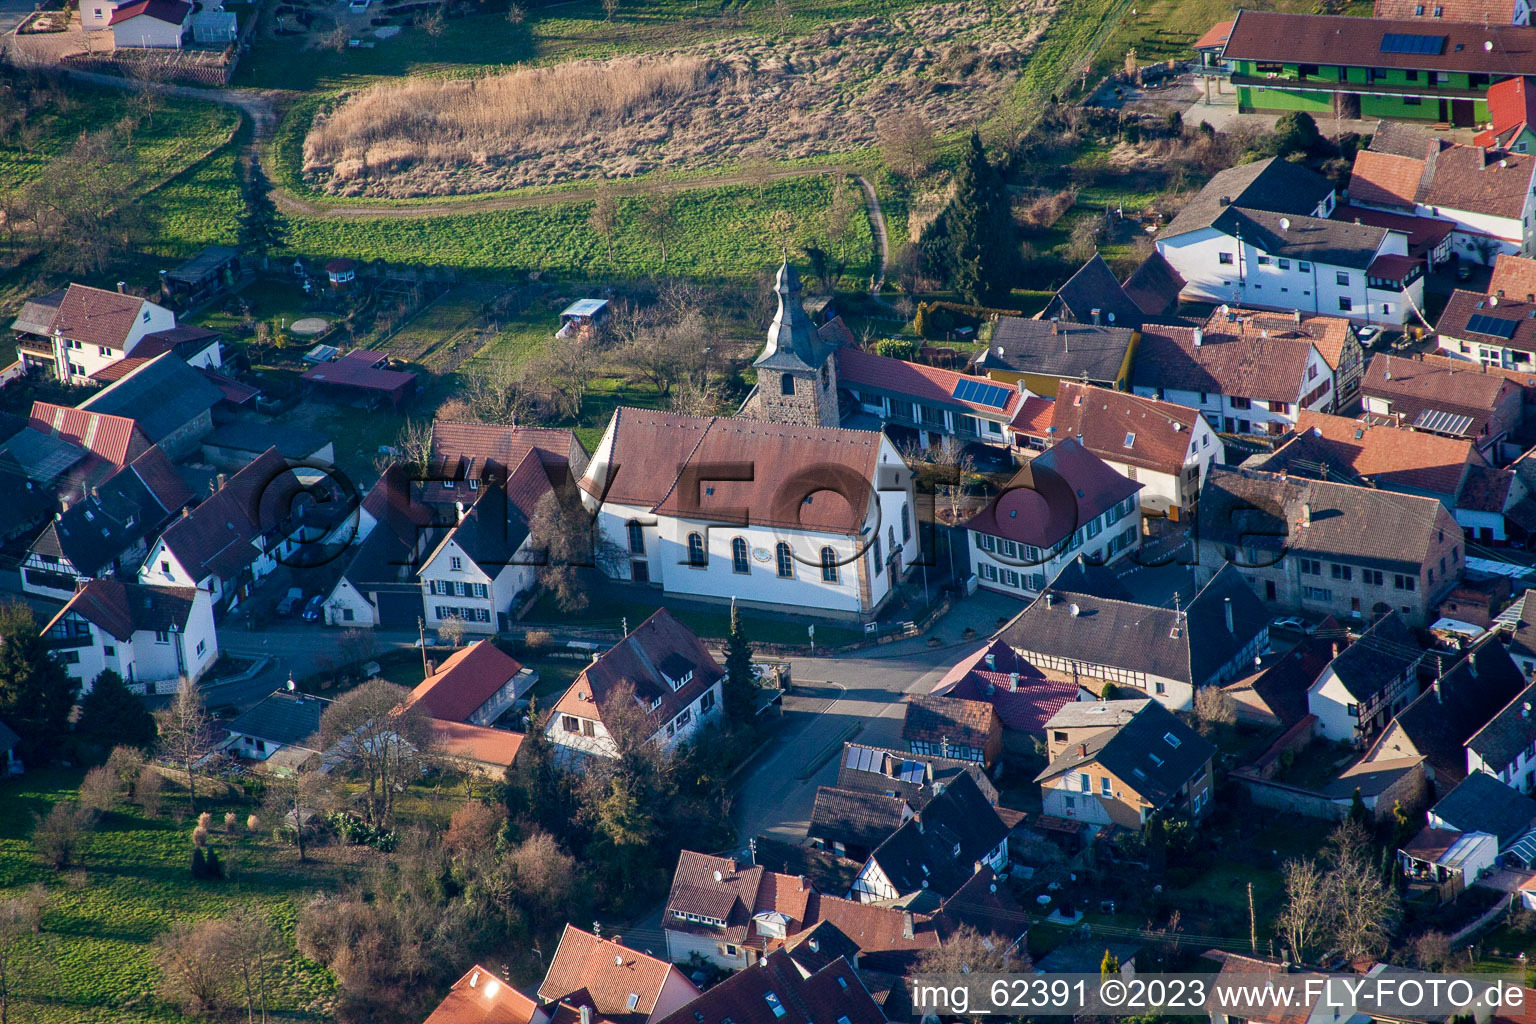 Aerial view of St Simon in the district Pleisweiler in Pleisweiler-Oberhofen in the state Rhineland-Palatinate, Germany